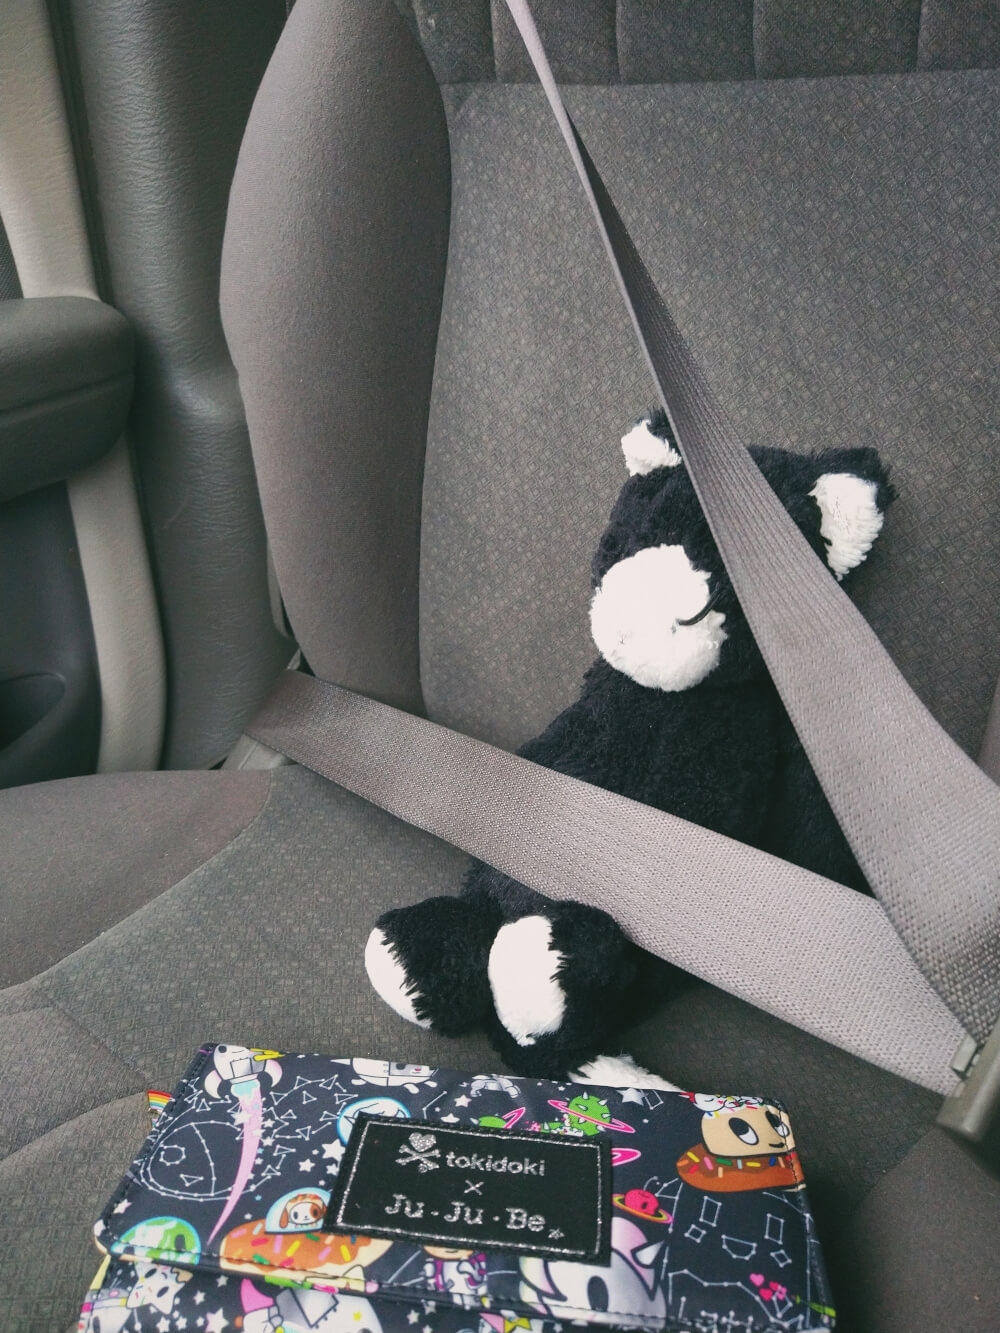 Stuffed cat buckled into front car seat, colorful wallet